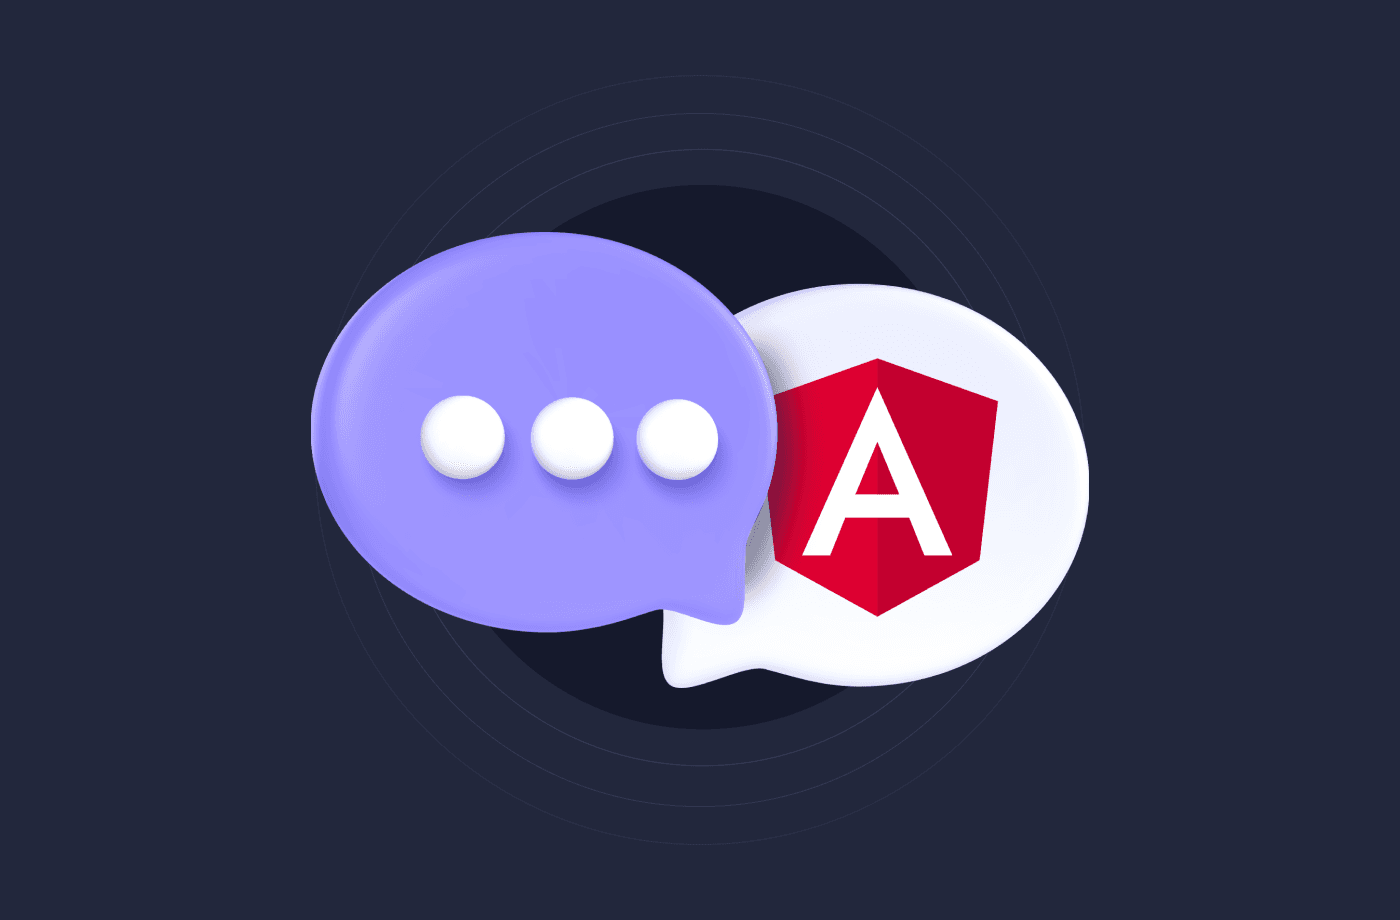 Creating a Chatroom in Angular using Amplication
